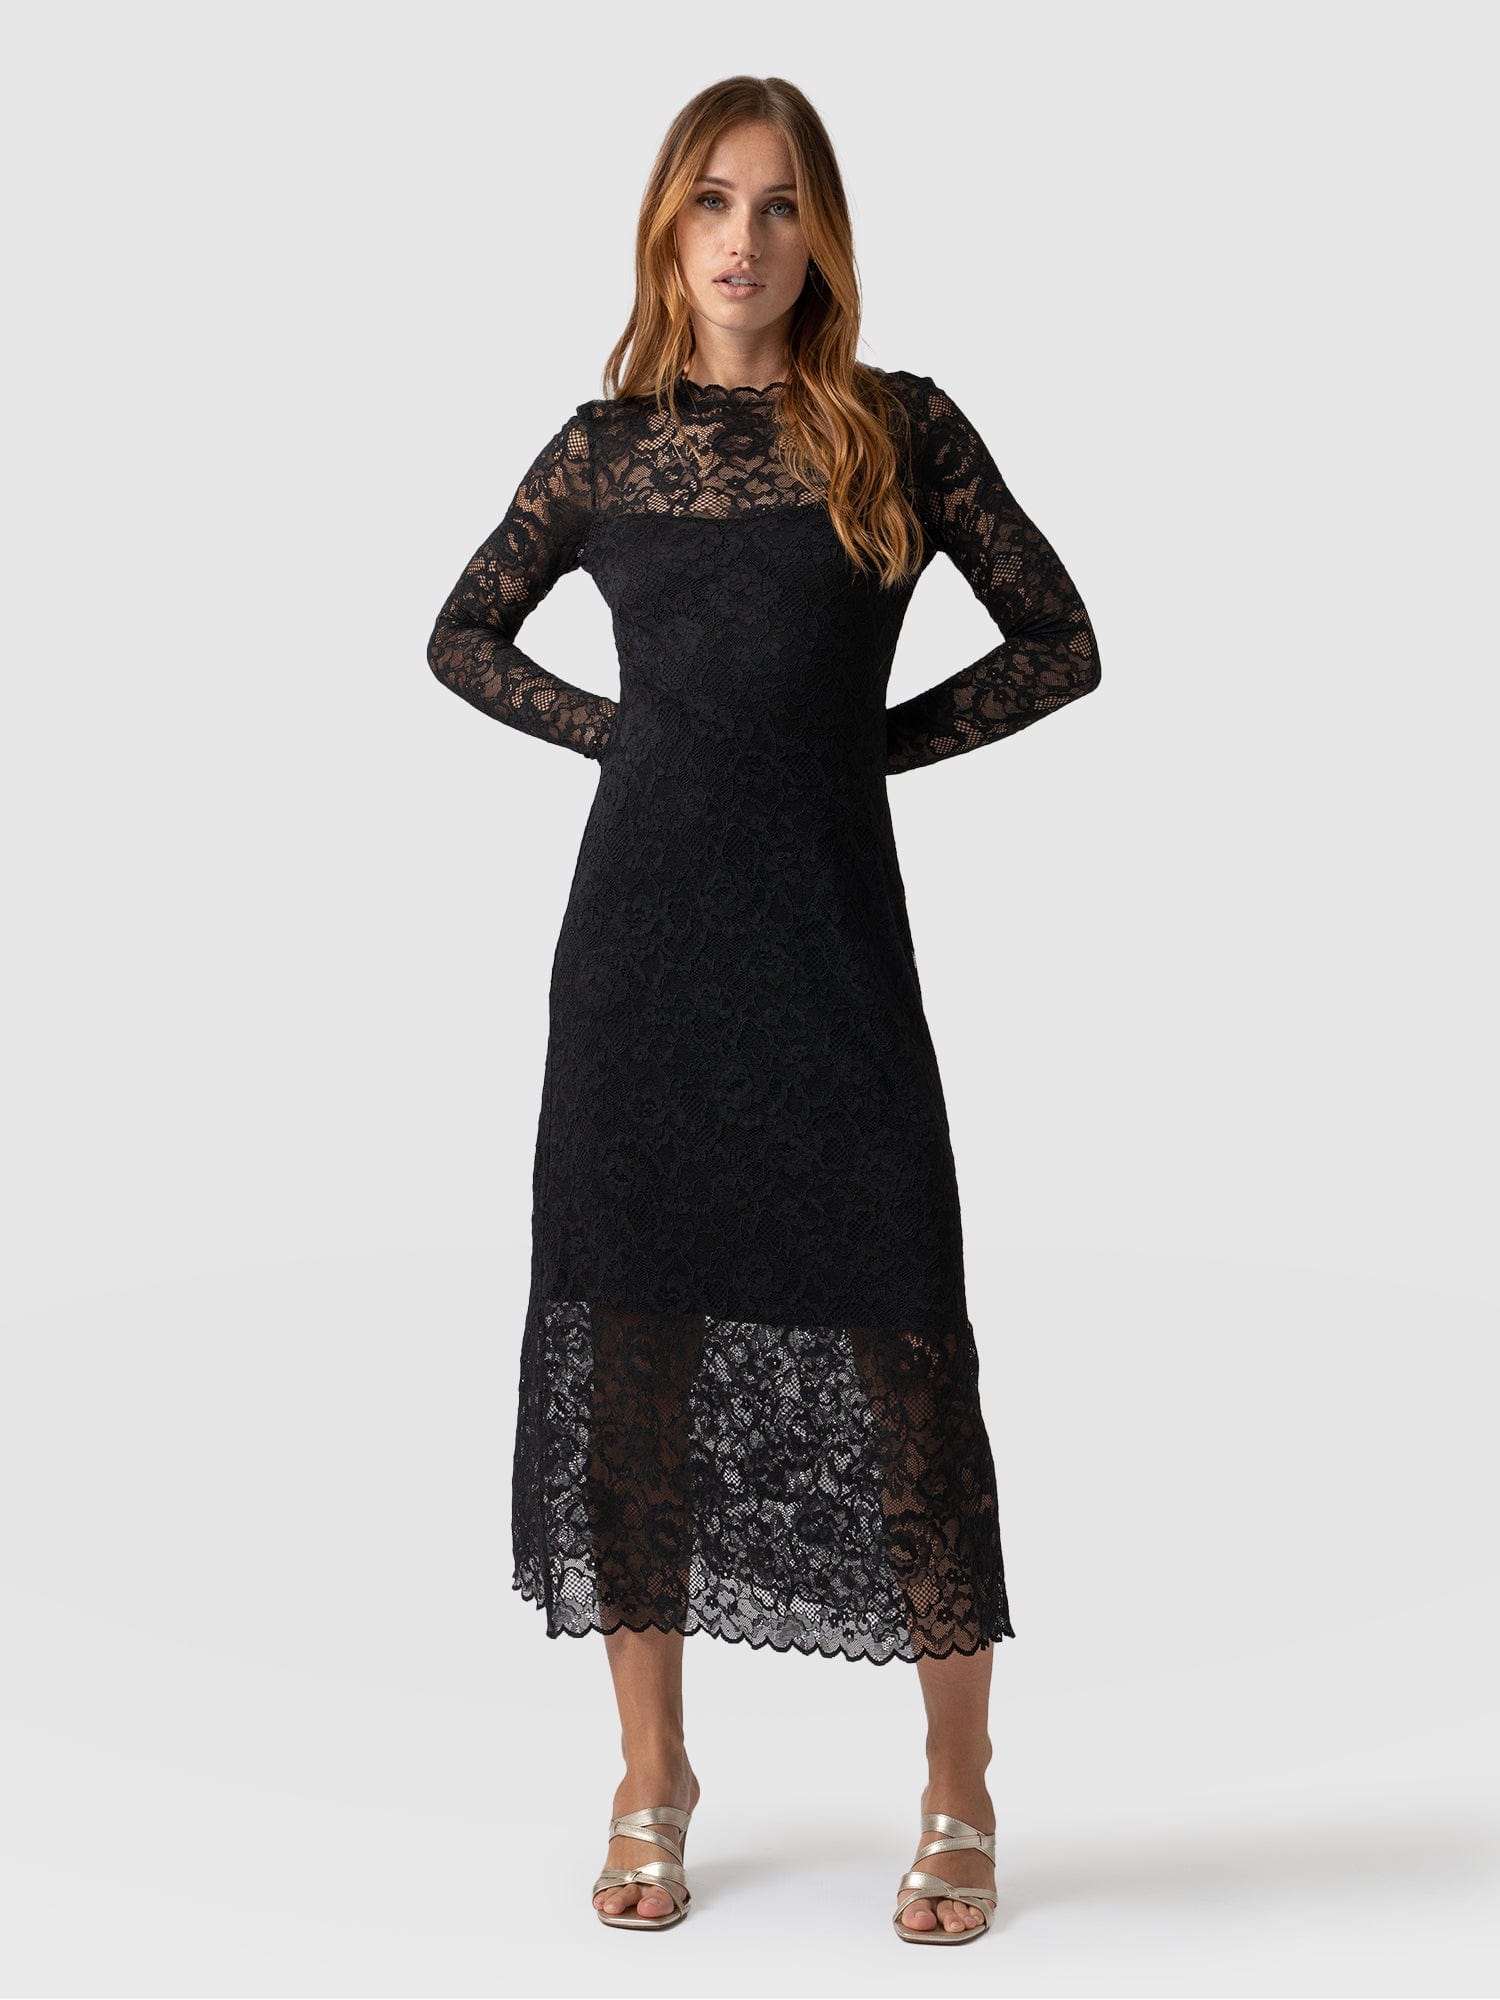 Summer Korean Fashion Lace Dresses For Womenes Women Short Sleeve Office  Lady Bodycon Plus Size Black Sheath Vintage 210531 From Cong00, $41.49 |  DHgate.Com